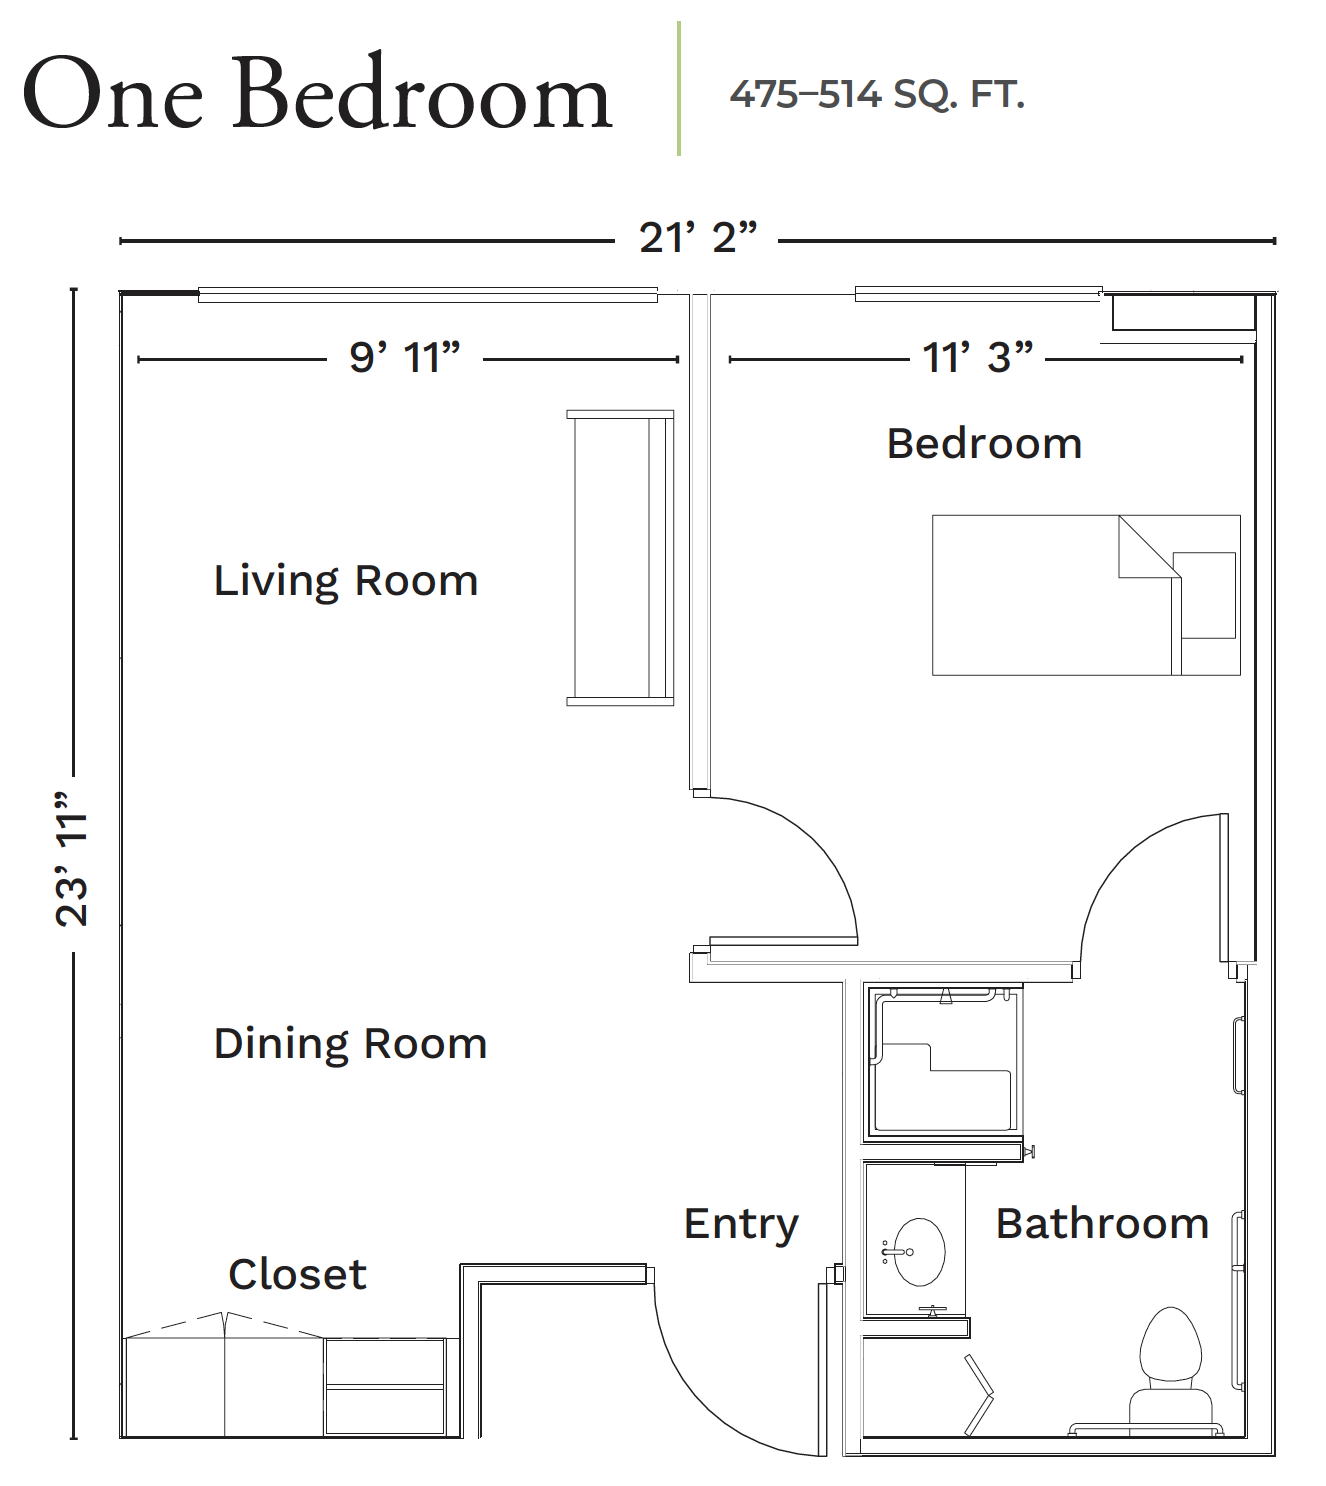 Floor plan of a one-bedroom apartment unit with living room, dining room, bedroom, bathroom, and closet.